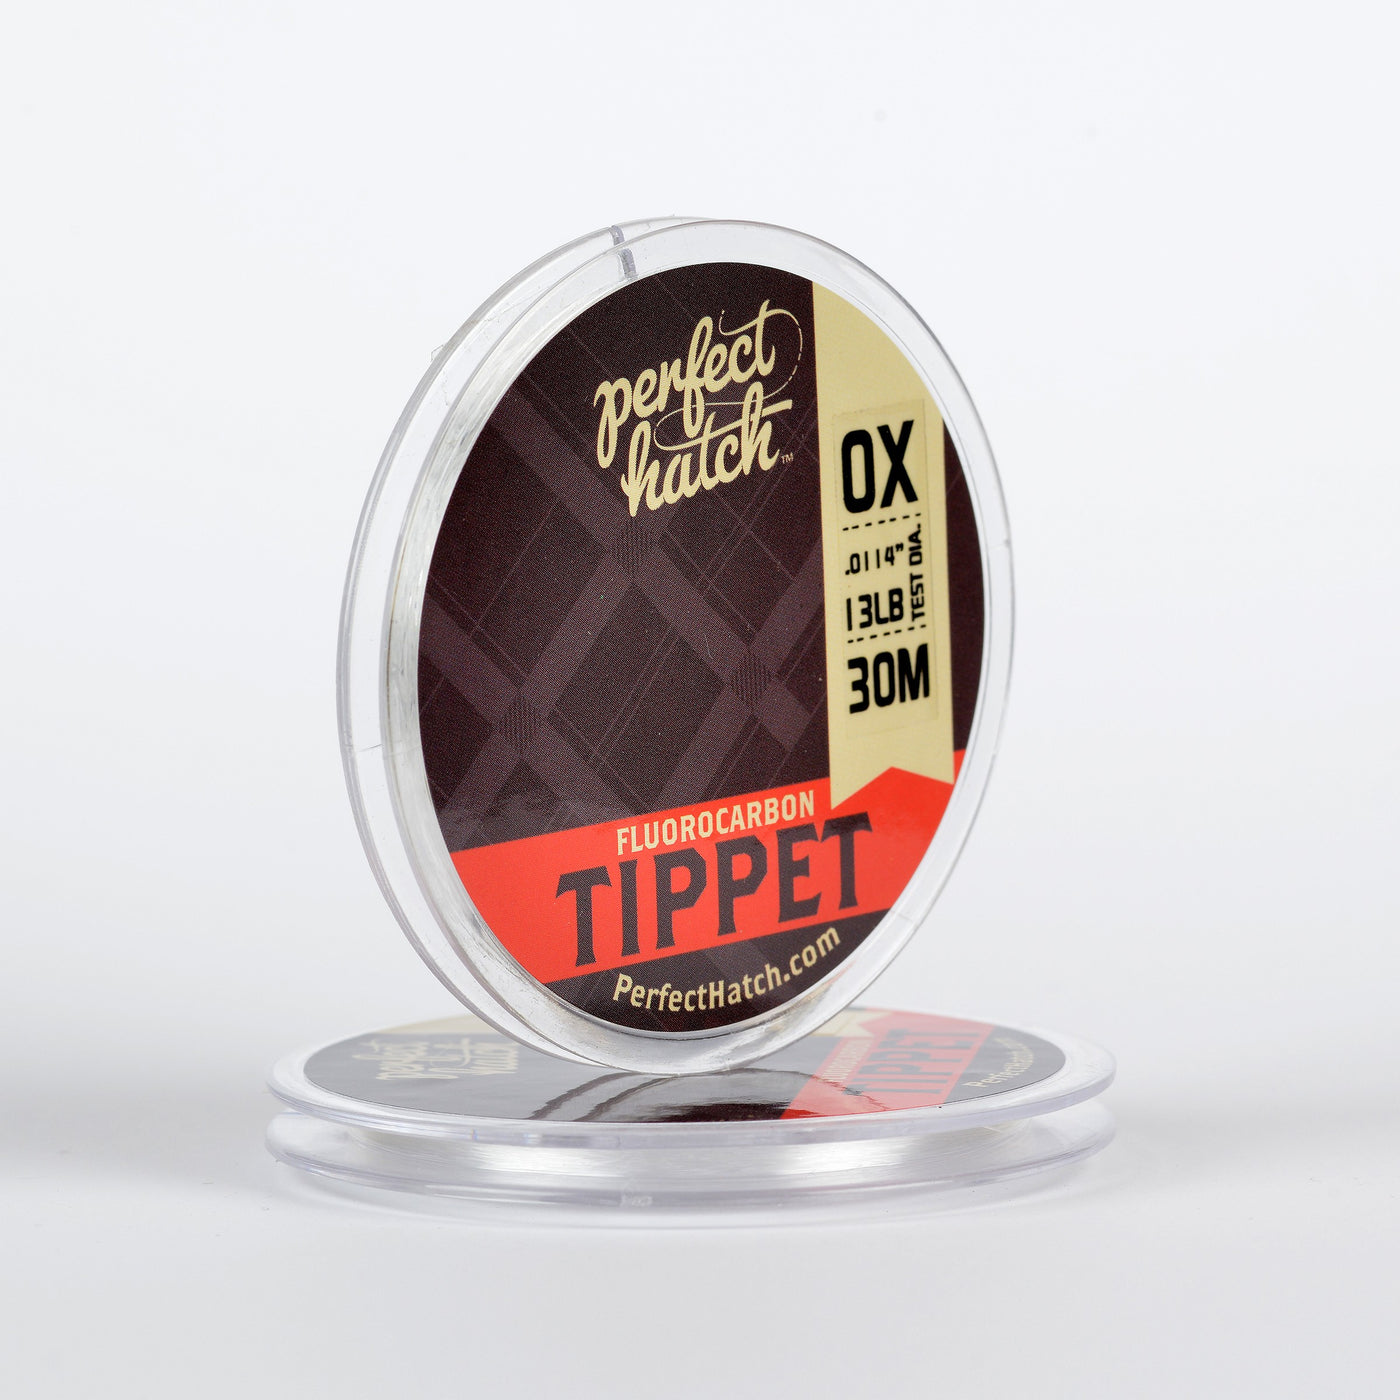 Fluorocarbon Tippet Material